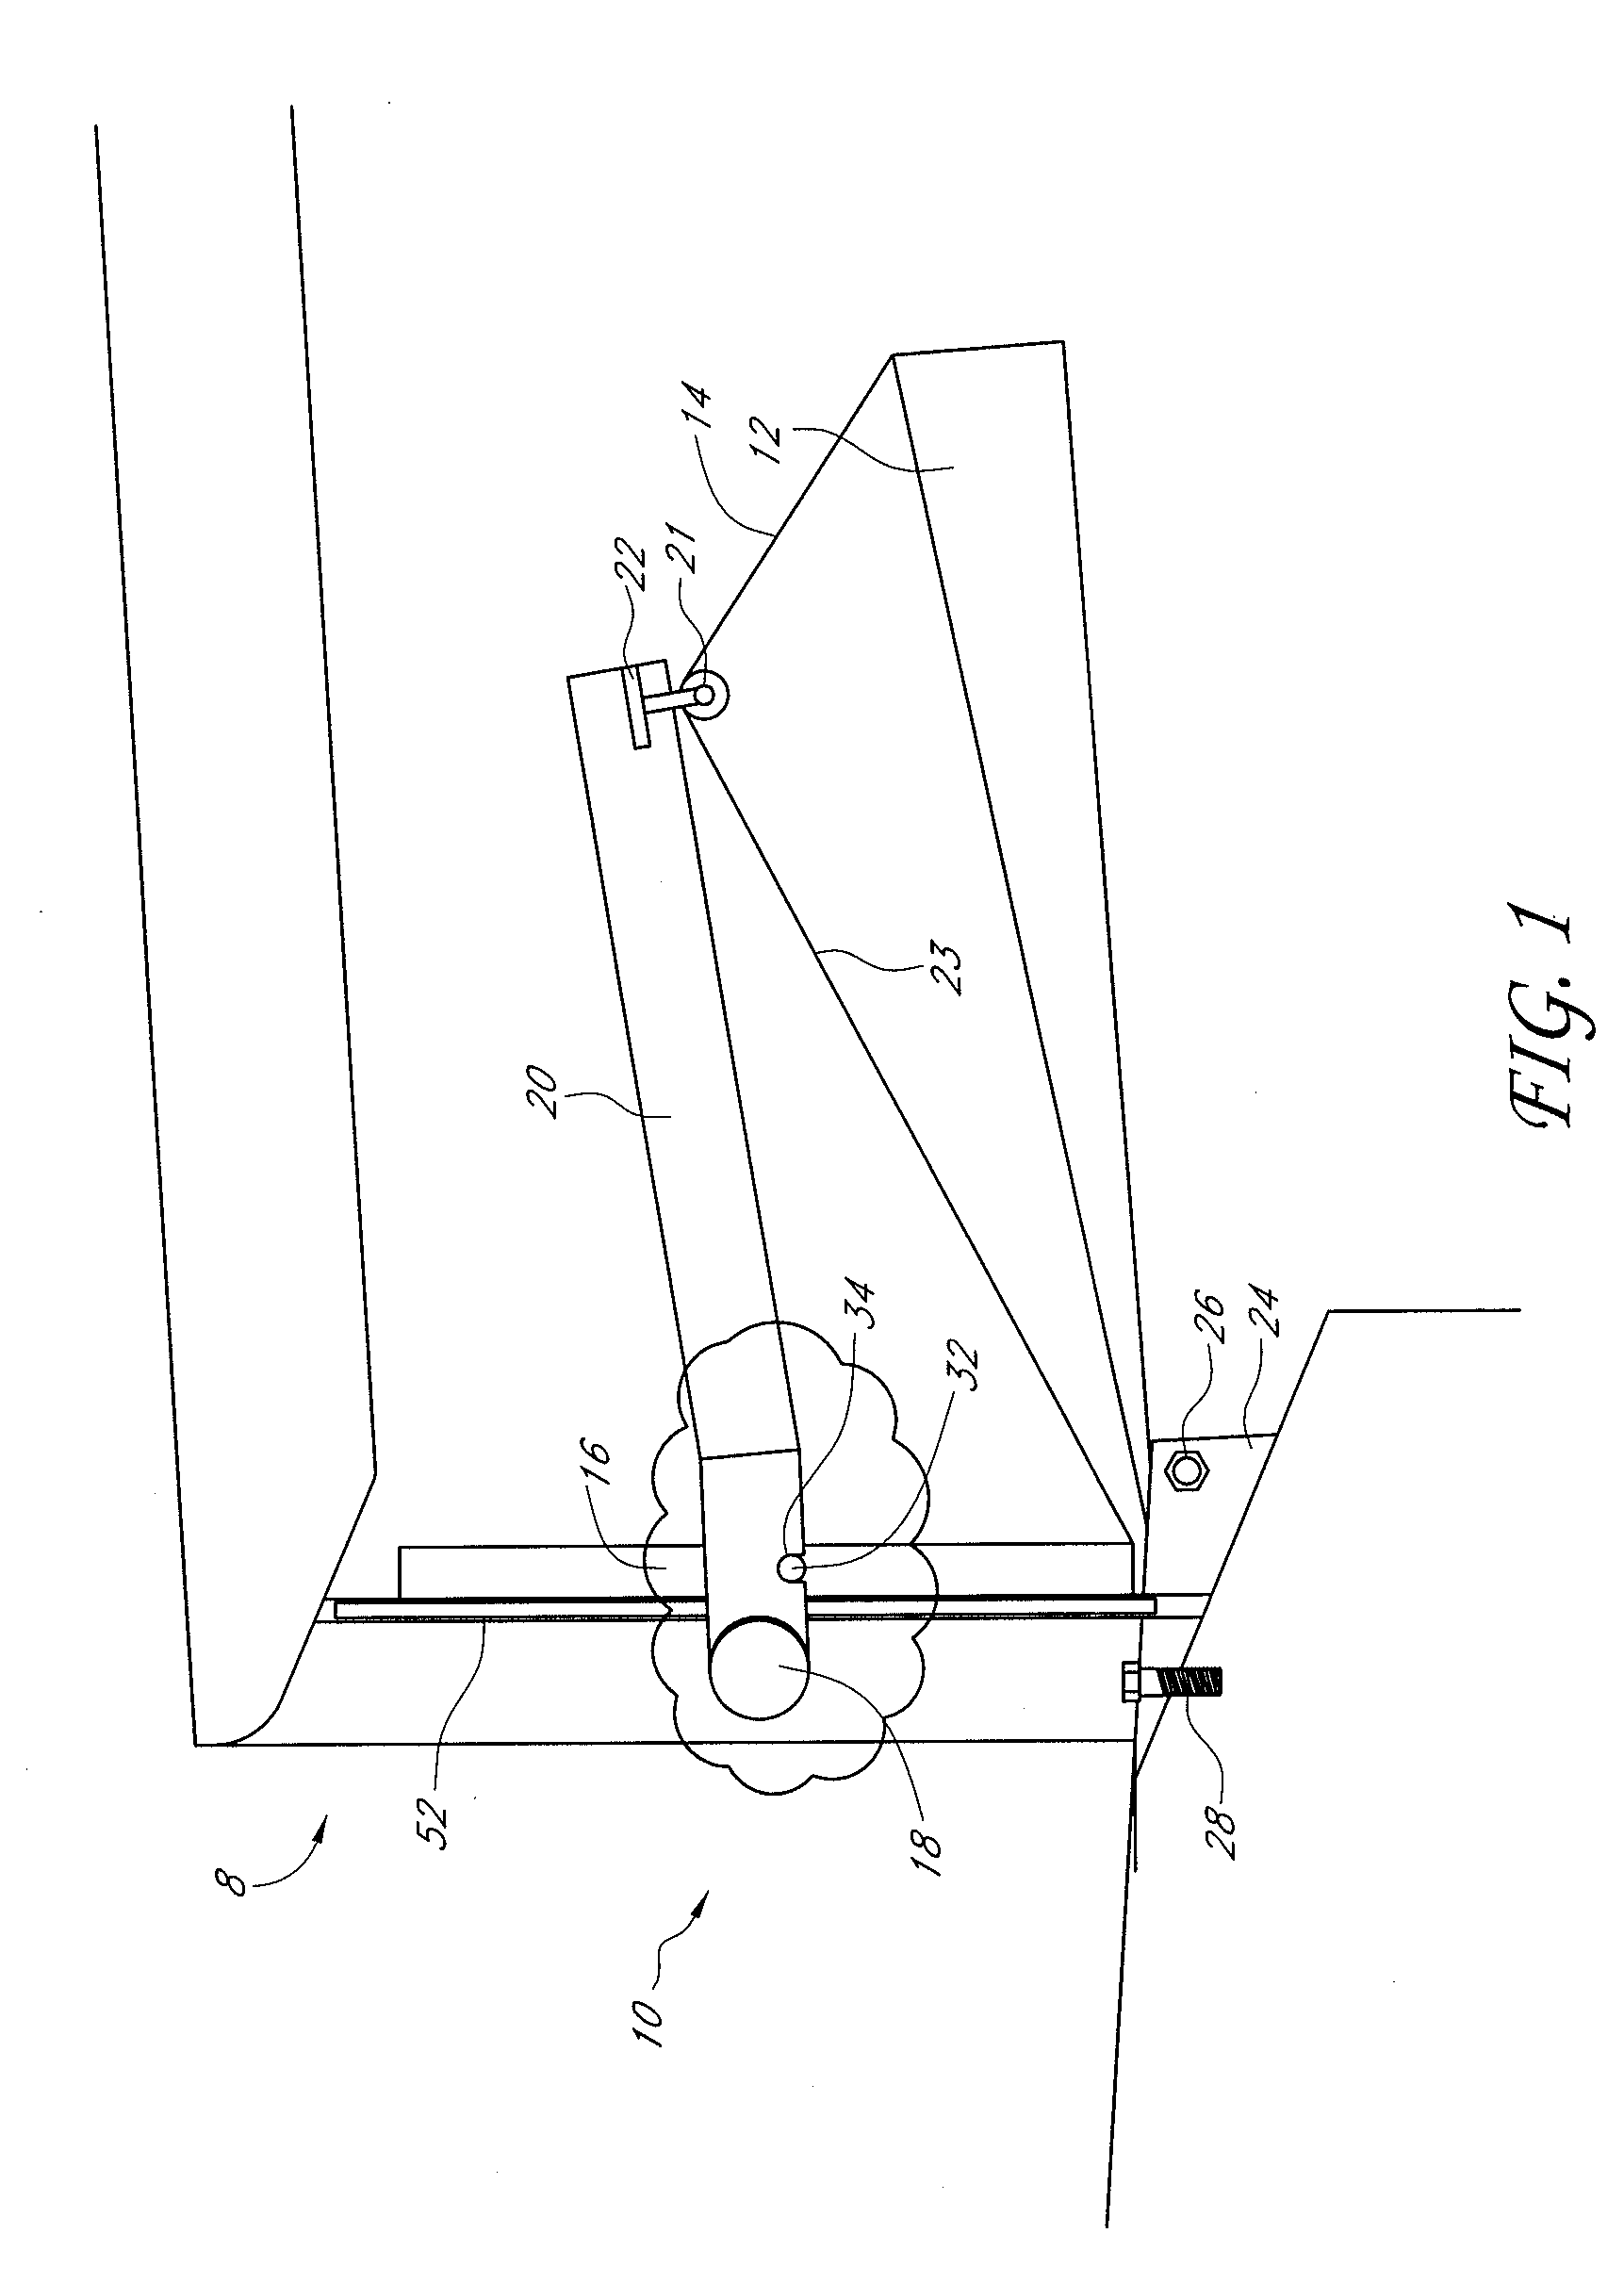 Drain grate system and methods